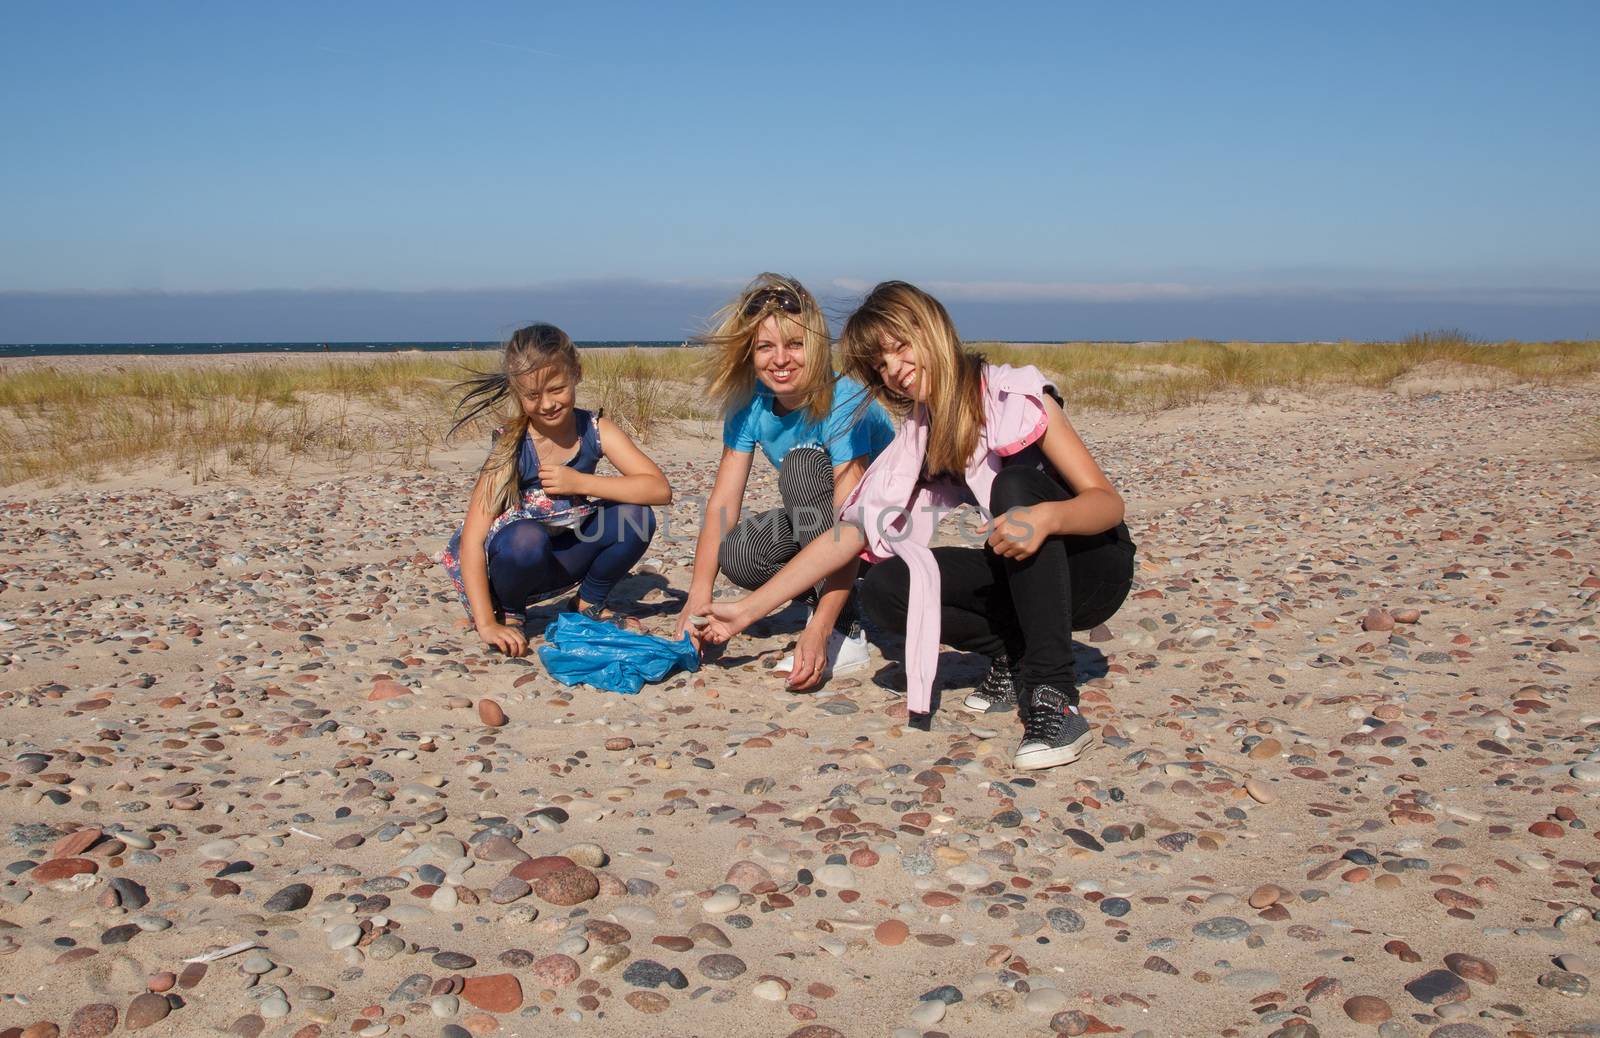 Three smiling girls on an empty beach collect stones